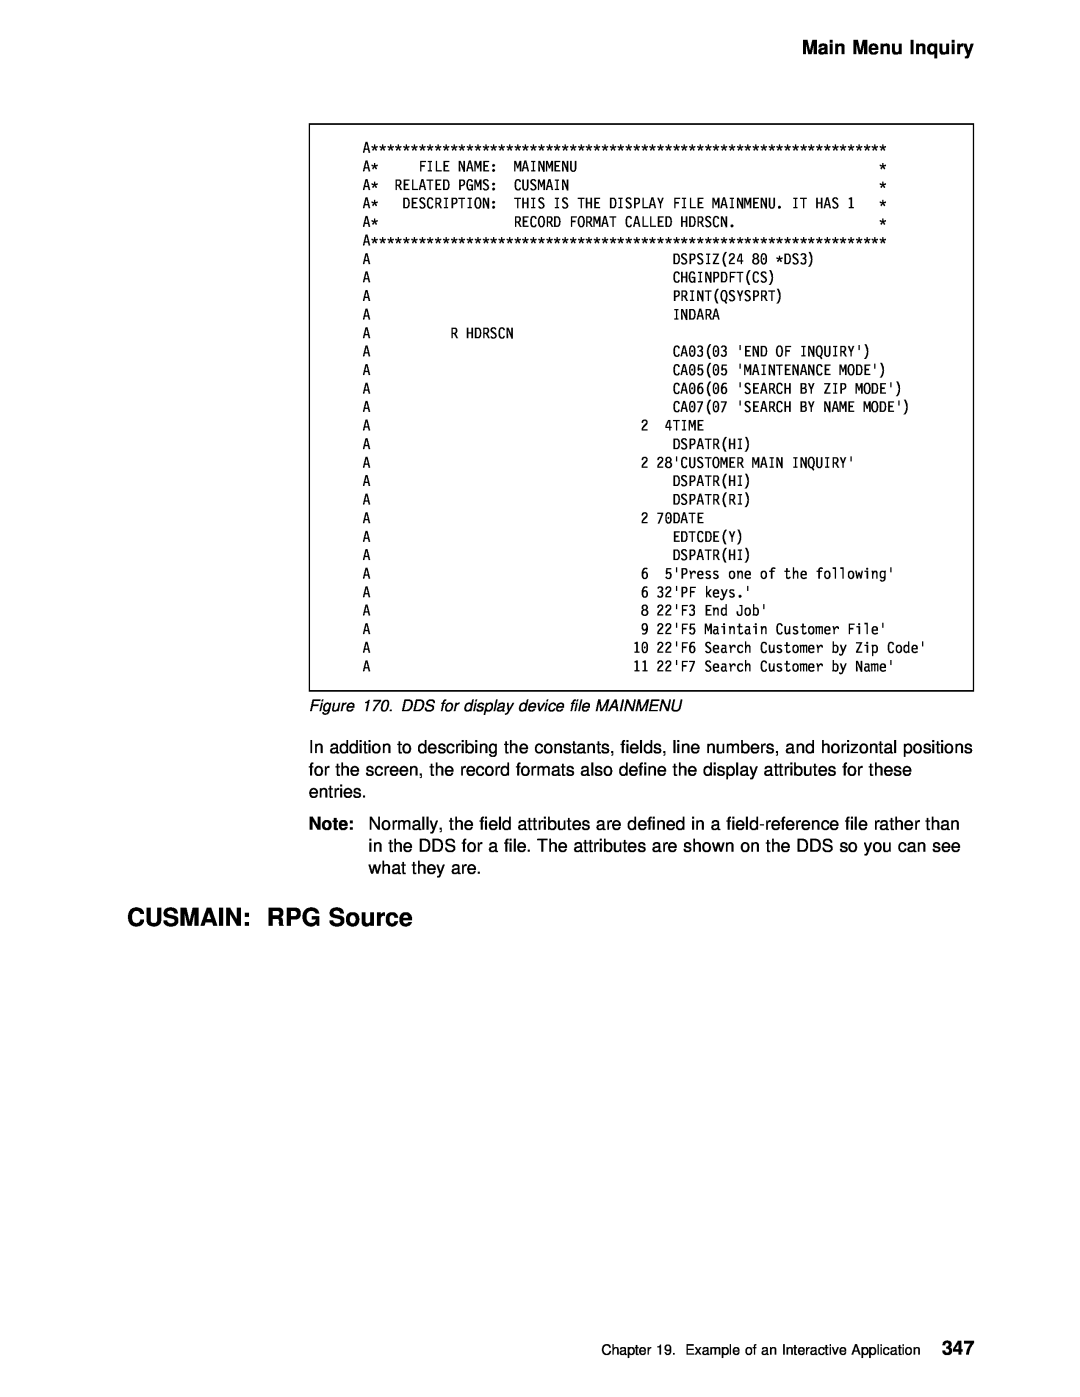 IBM AS/400 CUSMAIN RPG Source, Main Menu Inquiry, In addition, to describing the constants, fields, line numbers, and ho 